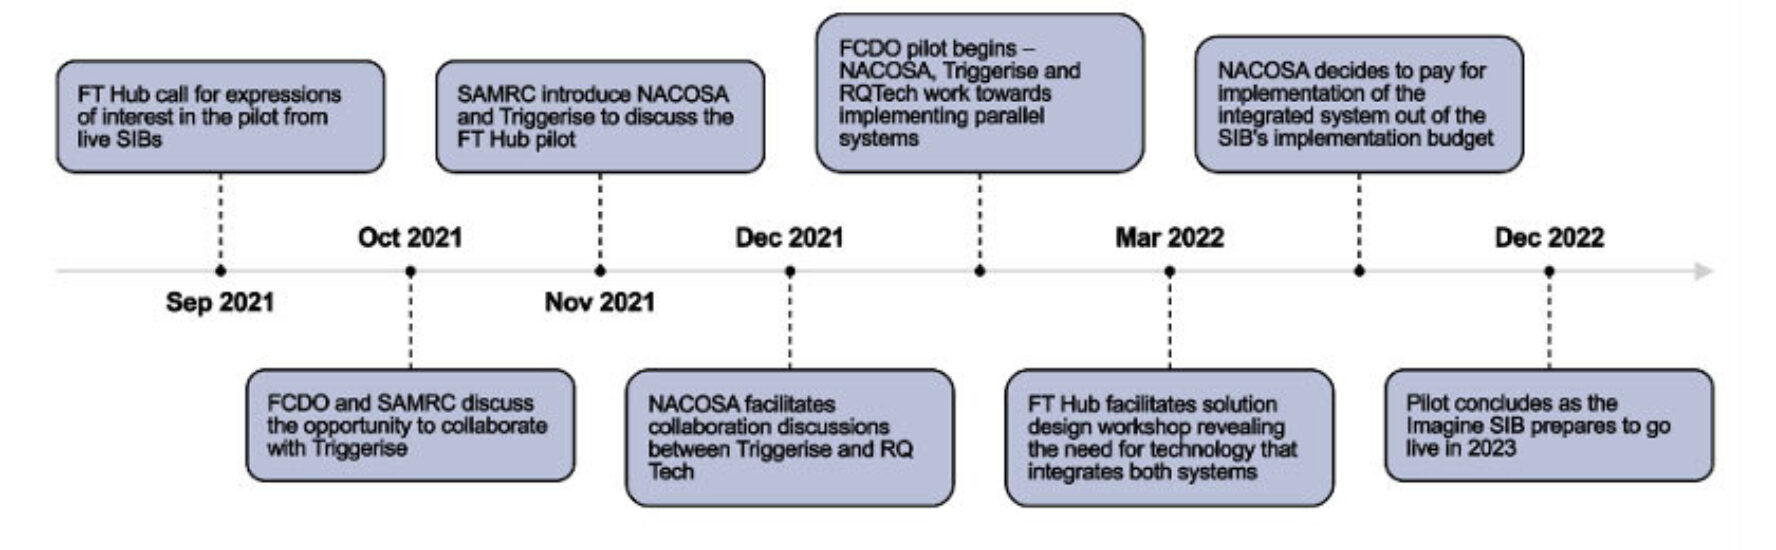 Timeline of the partnership, including a call for expressions of interest in September 2021, the launch of the pilot in late 2021 and its conclusion in December 2022